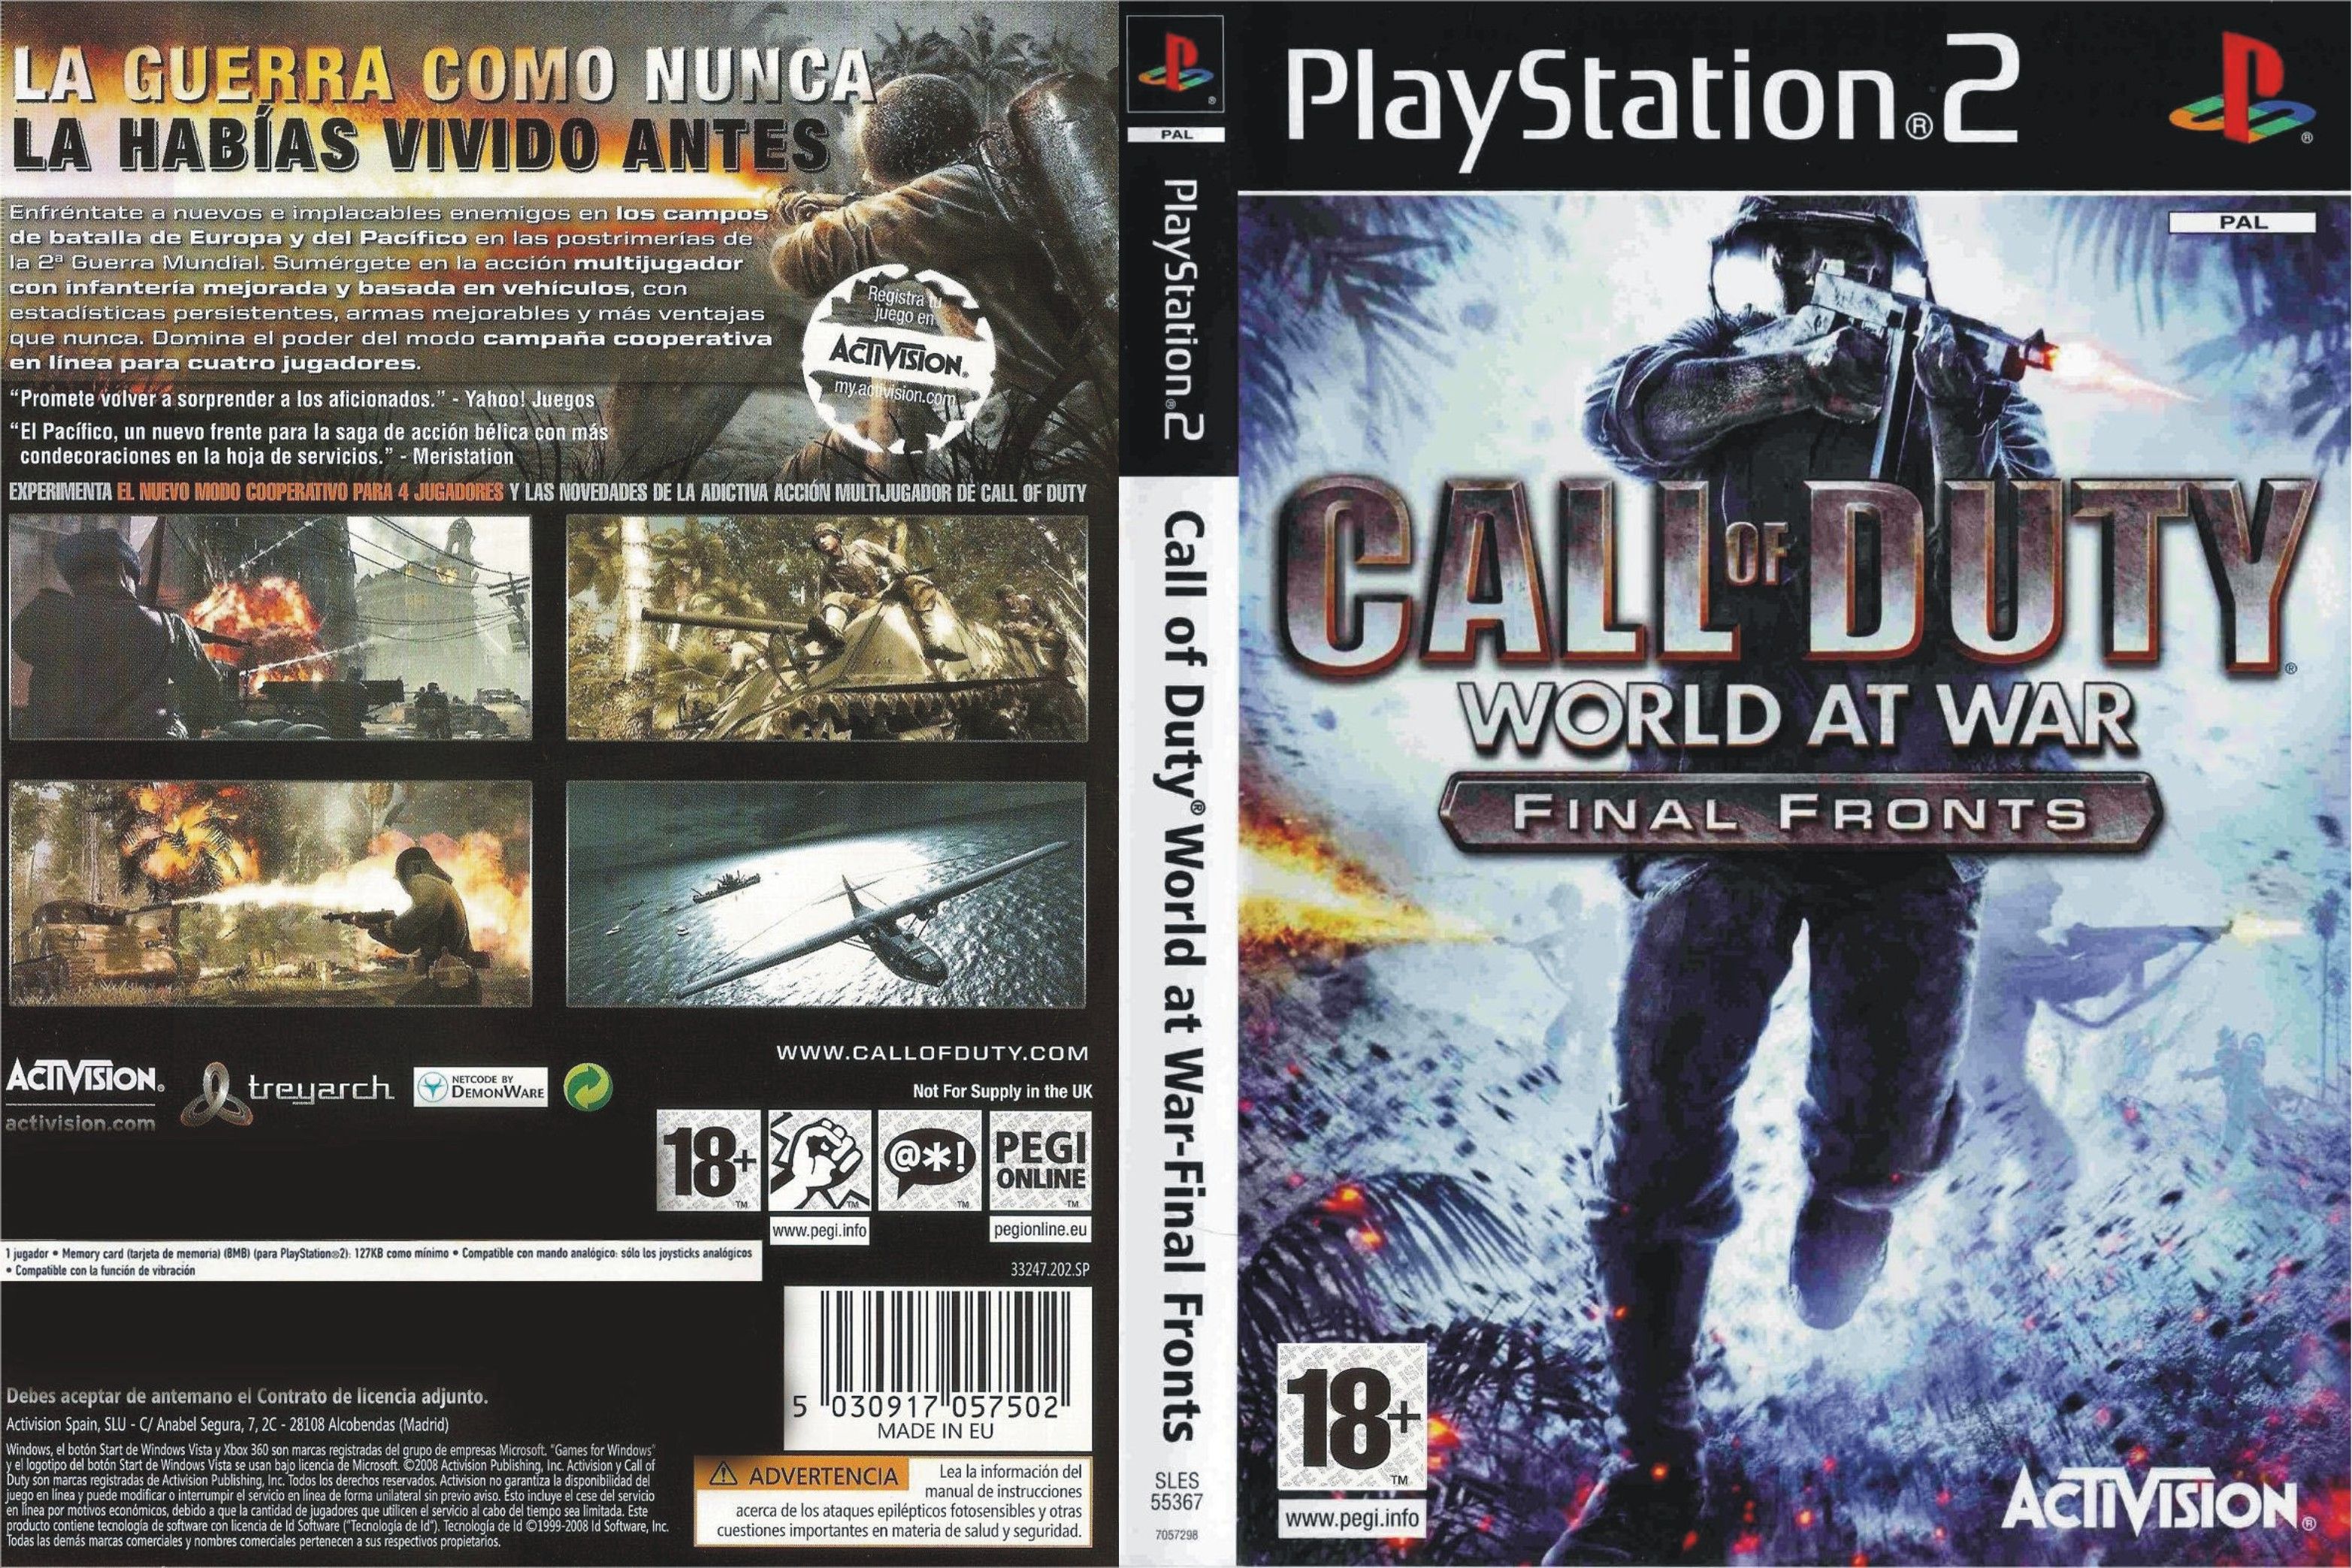 call of duty world at war final fronts difference